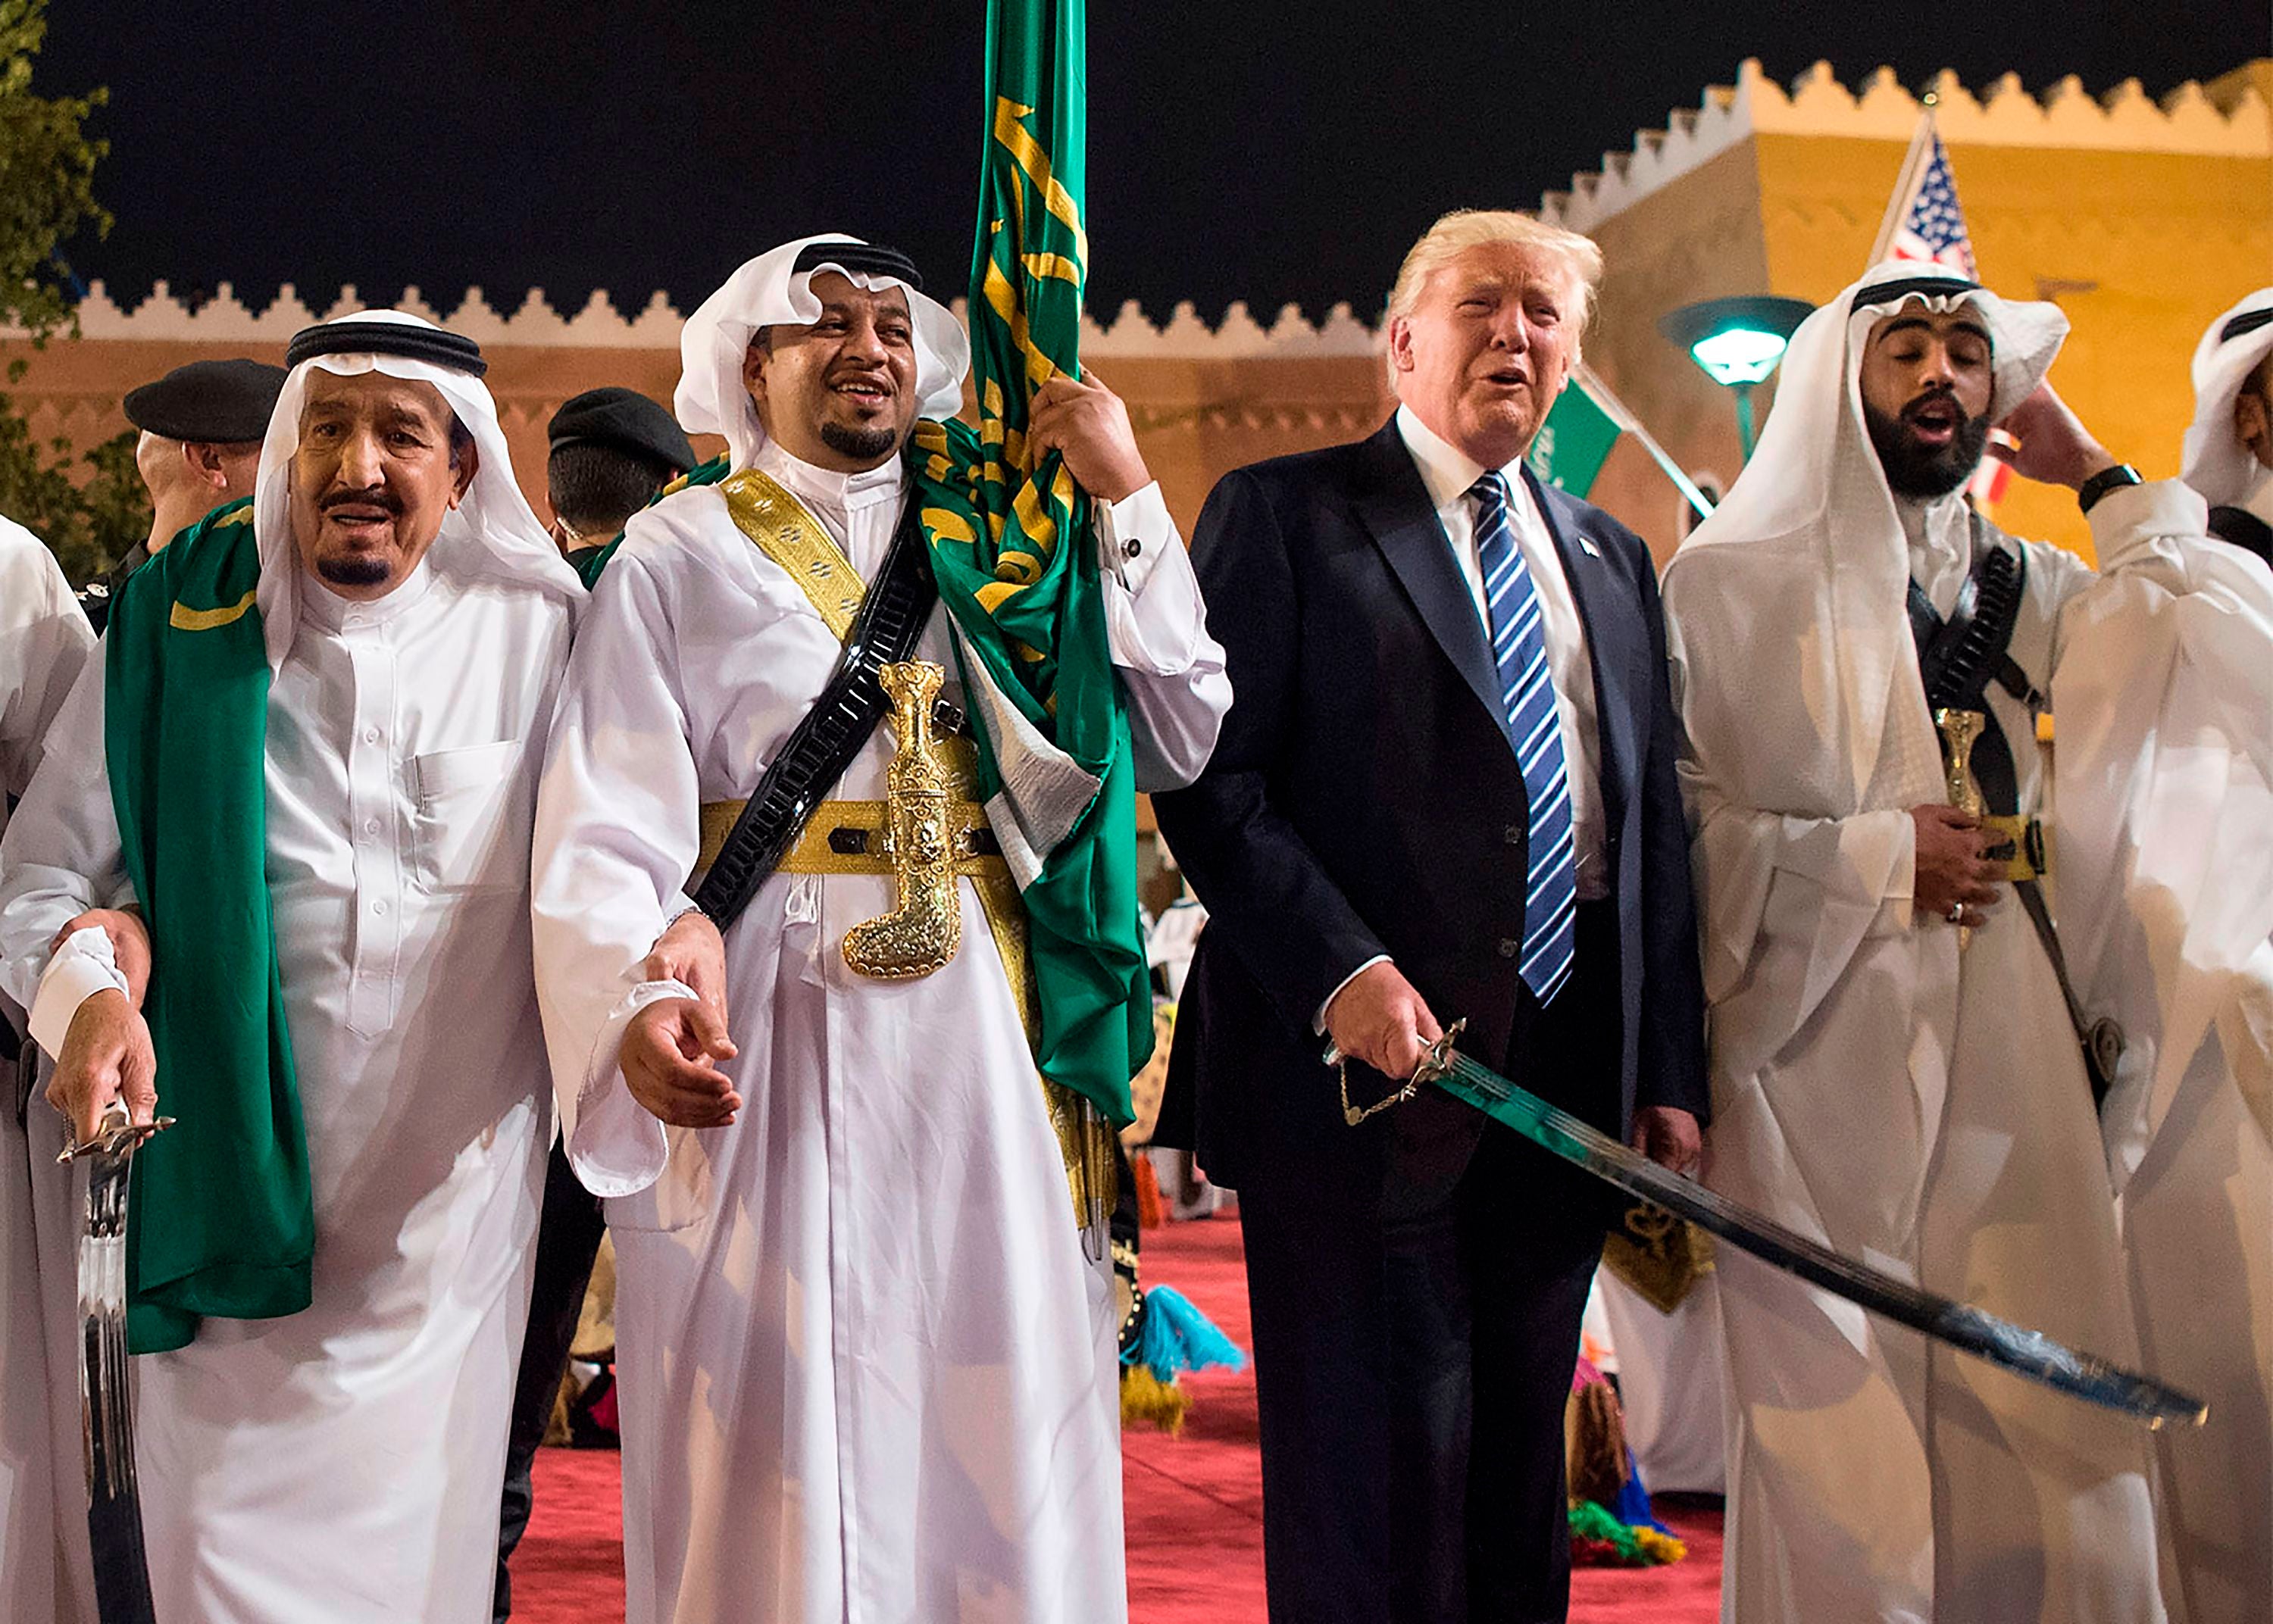 Trump at the Saudi Royal Palace in May 2017, a trip which launched a dramatic relationship revamp that freed the hands of the Gulf monarchies. (Photo by BANDAR AL-JALOUD/Saudi Royal Palace/AFP via Getty Images)